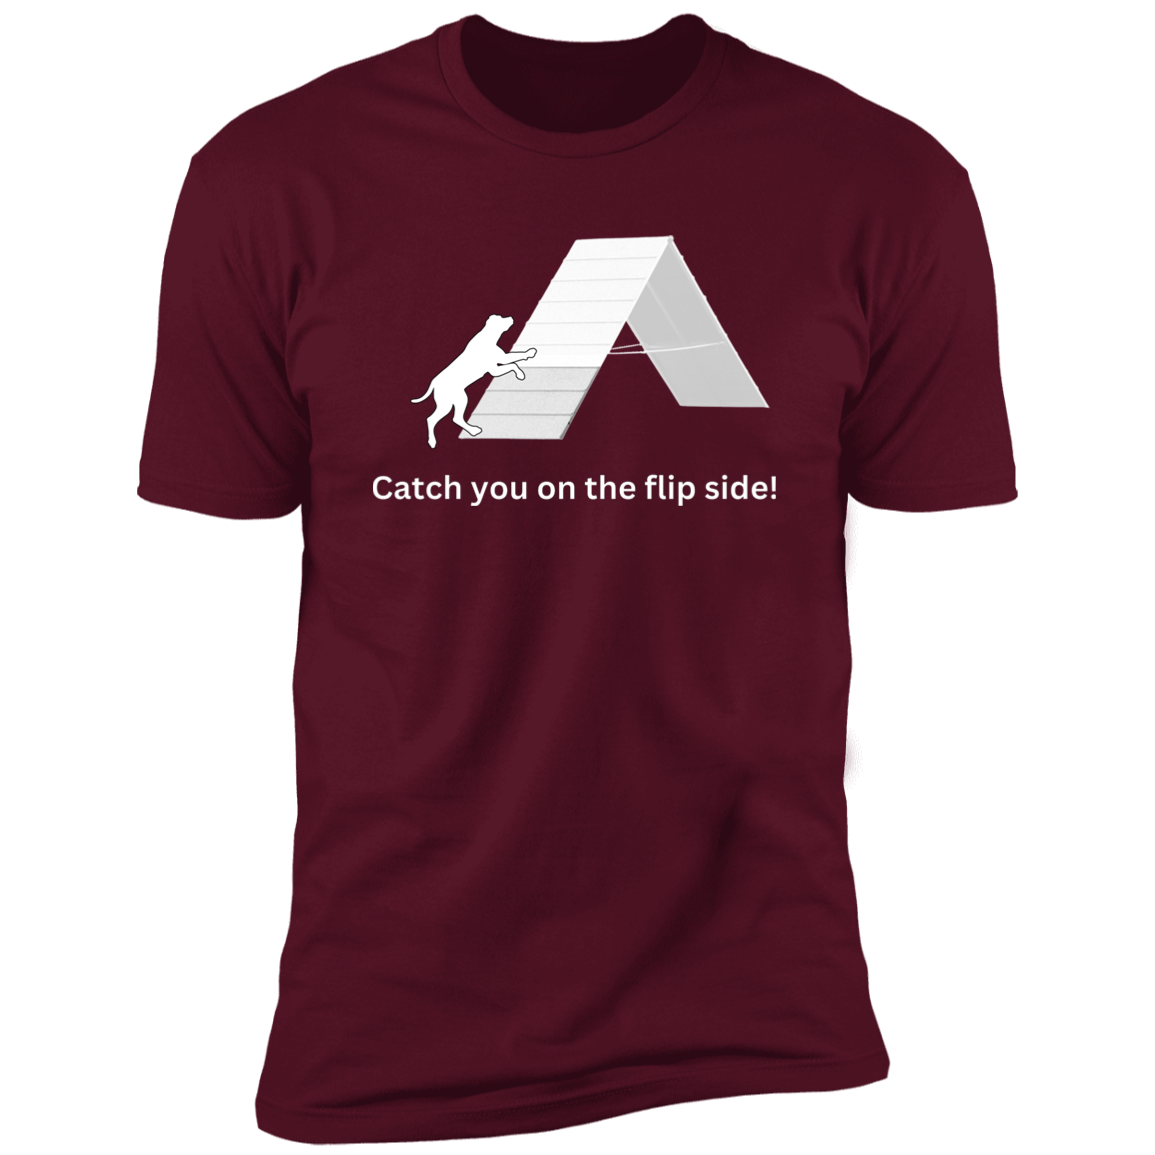 Catch You on the Flip Side T-shirt, Dog Agility Shirt for humans, in maroon